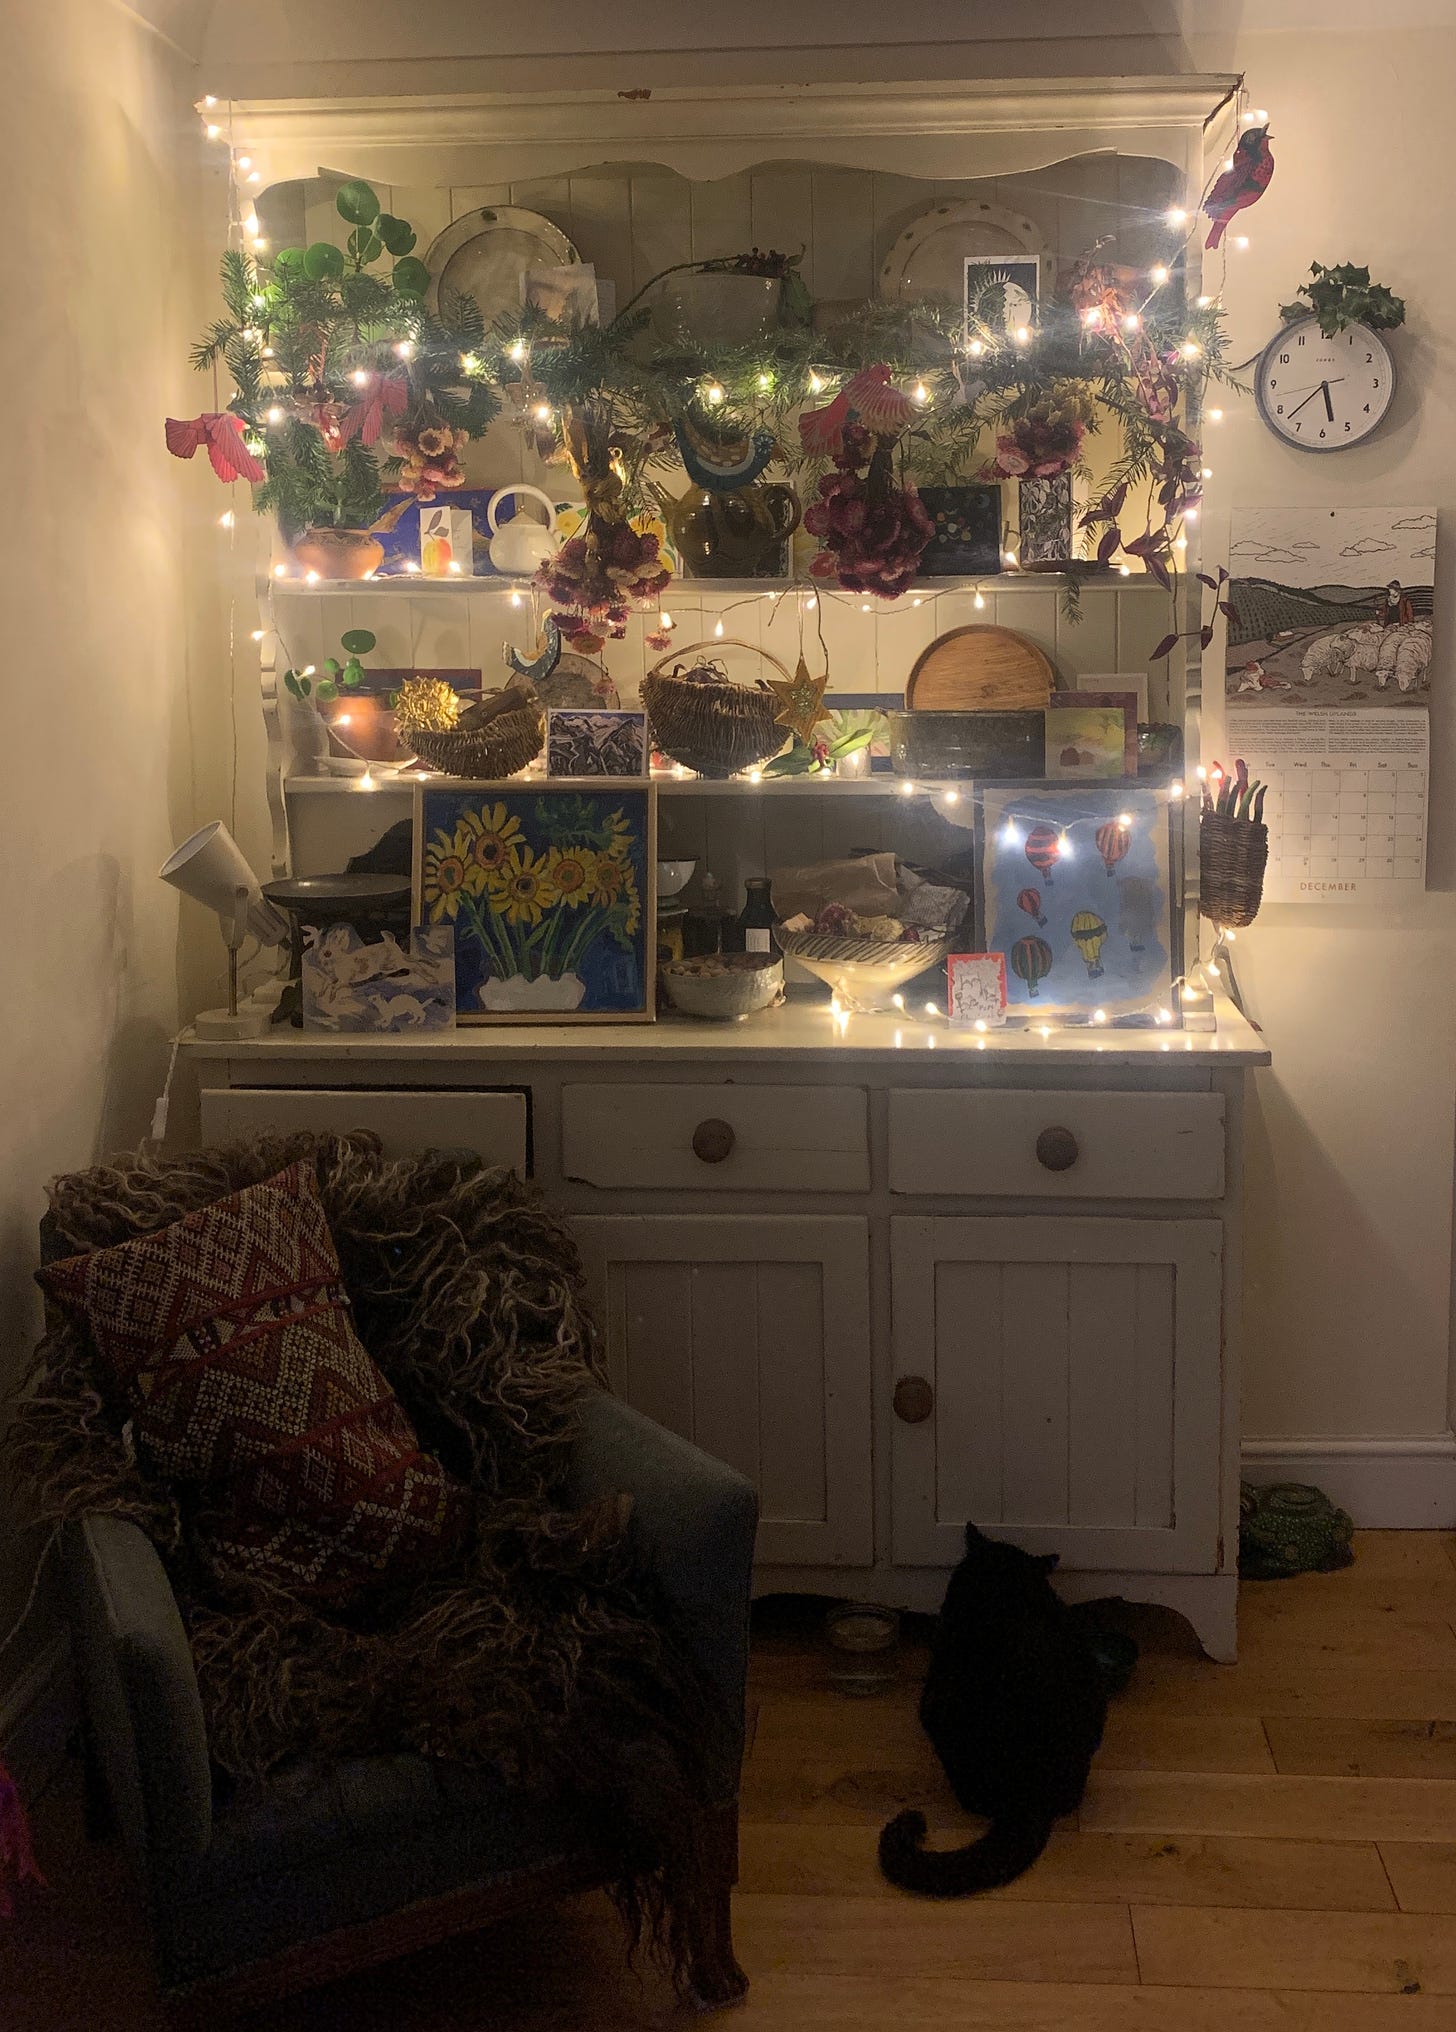 A white kitchen dresser filled with knick knacks, fairy lights, evergreen branches, pictures, woven baskets. A black cat sits at the bottom